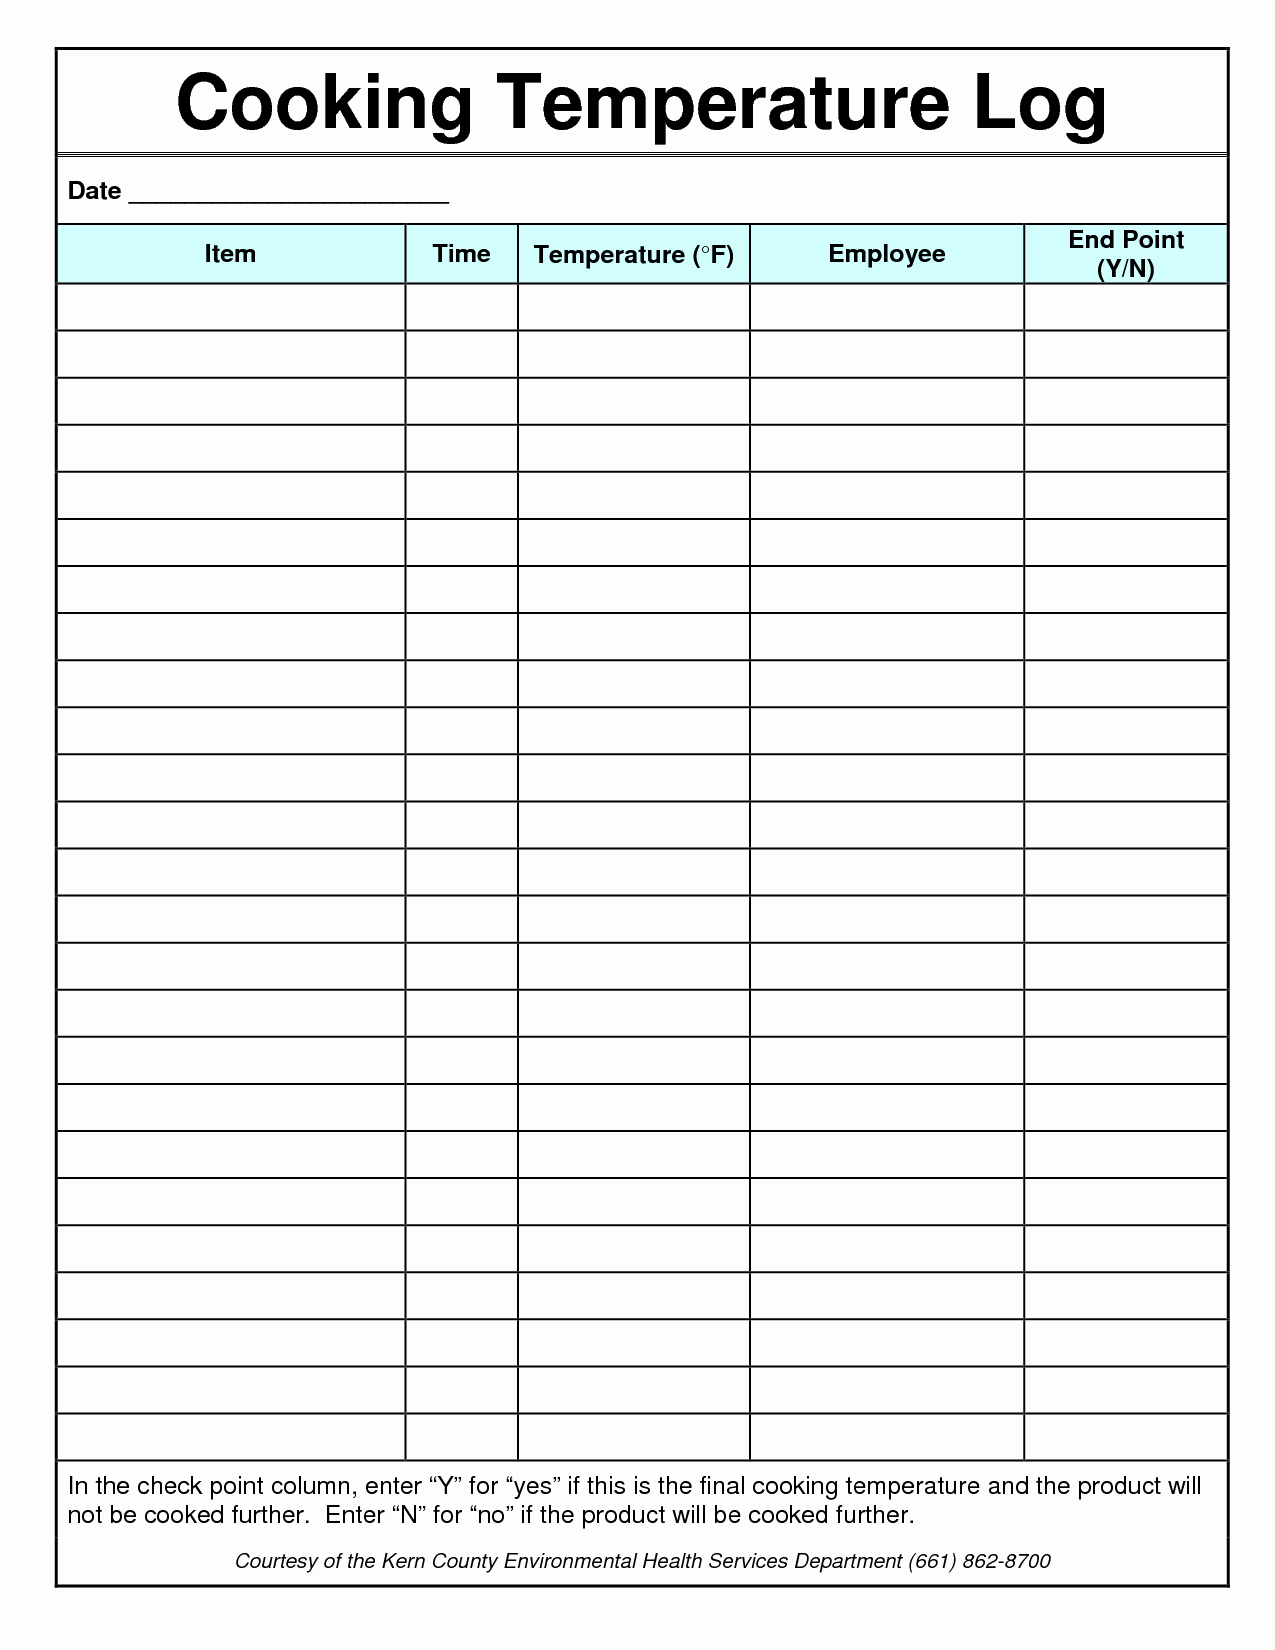 Temperature Log Sheet Template Awesome Best S Of Food Temperature Log Template Food